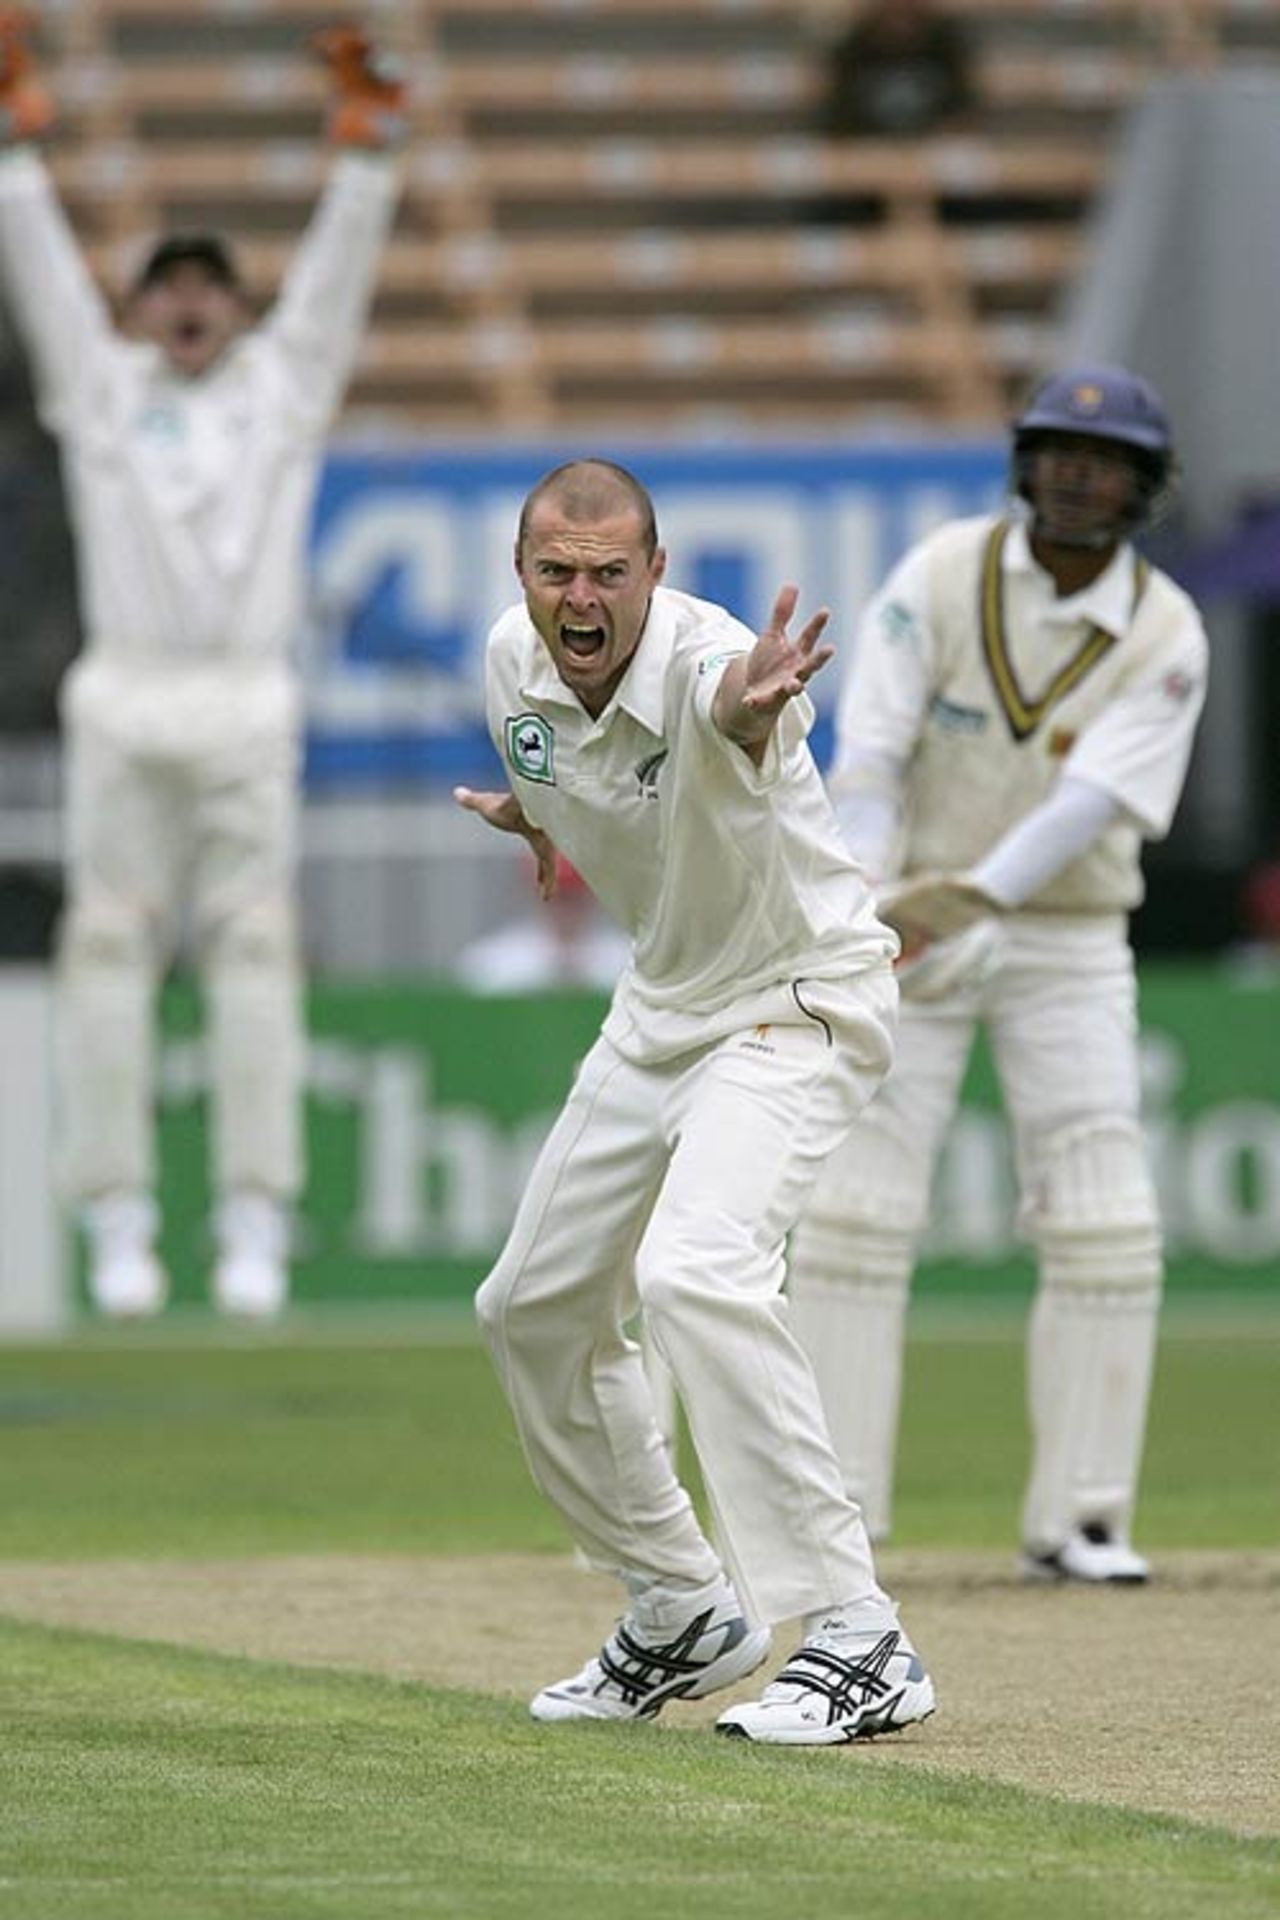 Chris Martin appeals in hope of getting his 100th Test wicket, New Zealand v Sri Lanka, 1st Test, Christchurch, 1st day